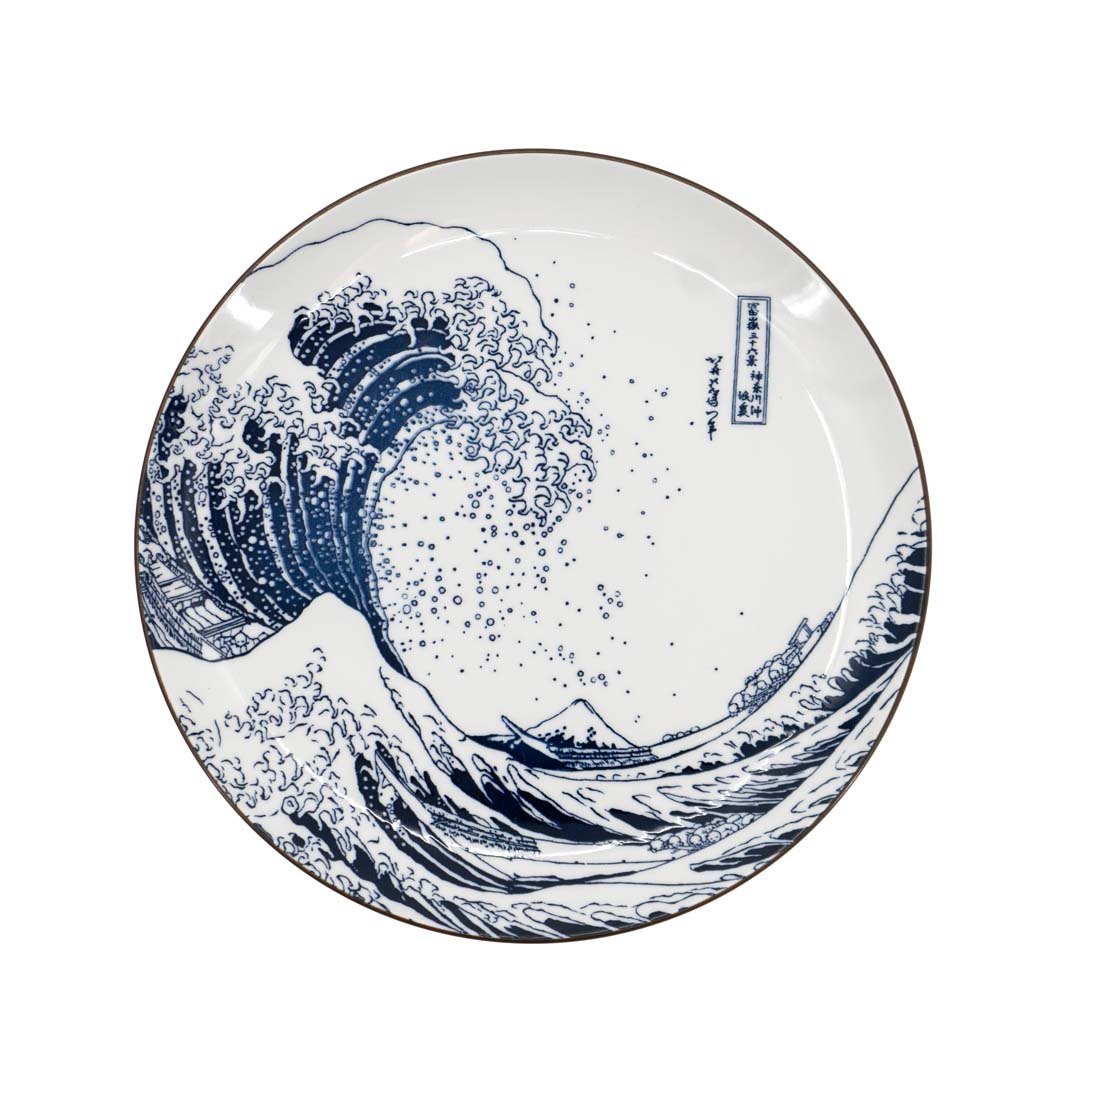 The Great Wave Ceramic Plate